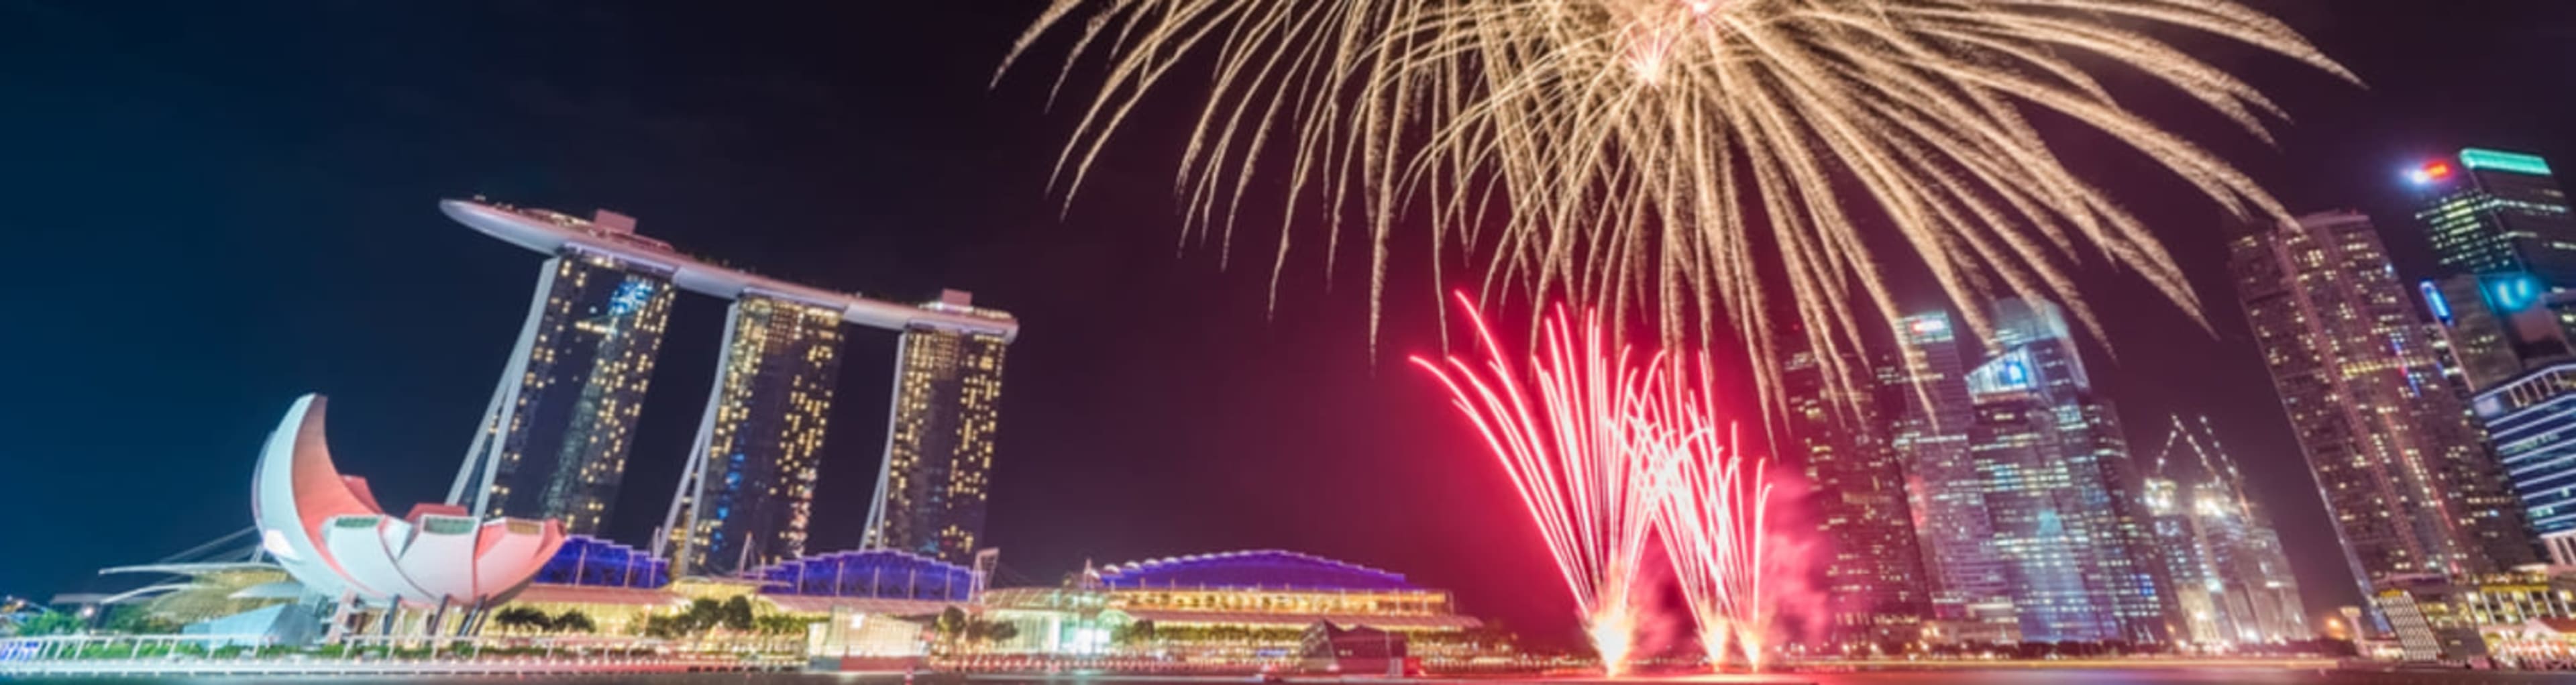 Fireworks over Marina Bay in Singapore